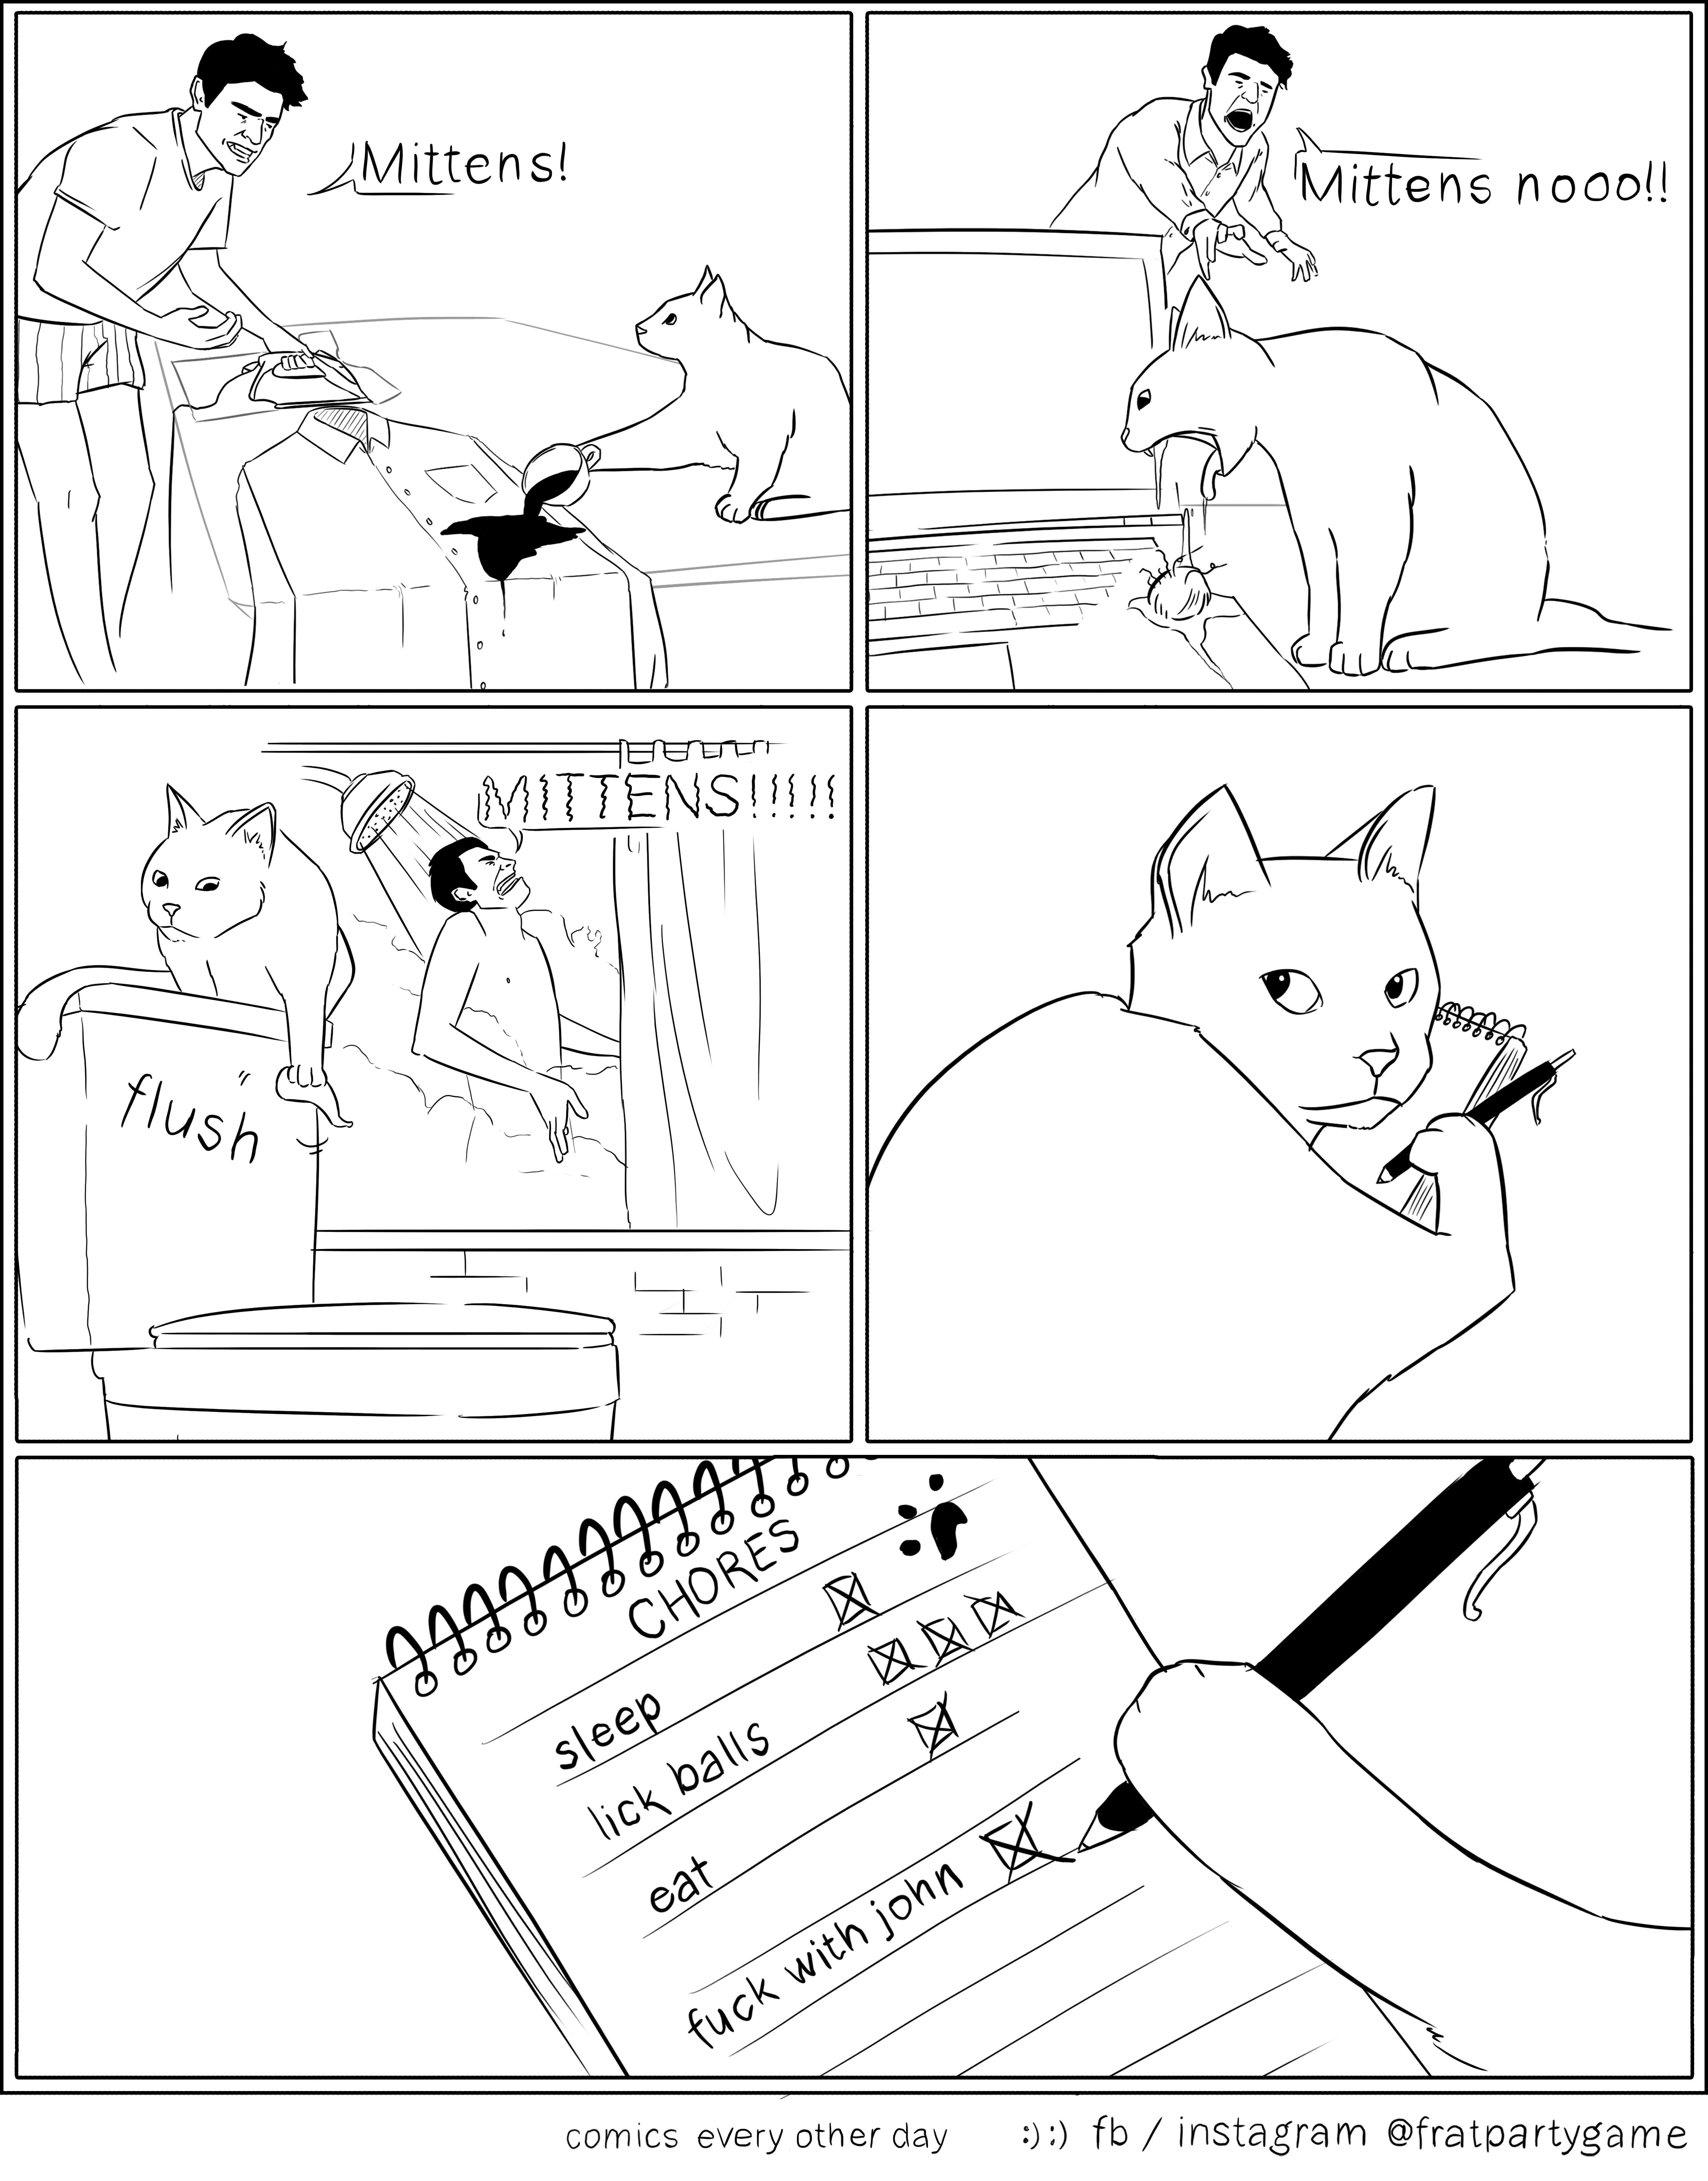 mittens cat comic - Mittens! Mittene nooo!! Mittens!!!!! I flush 13337368868 4444444444 Chores Sleep lick balls cat fuck with john Comics every other day fbinstagram Ofratpartygame